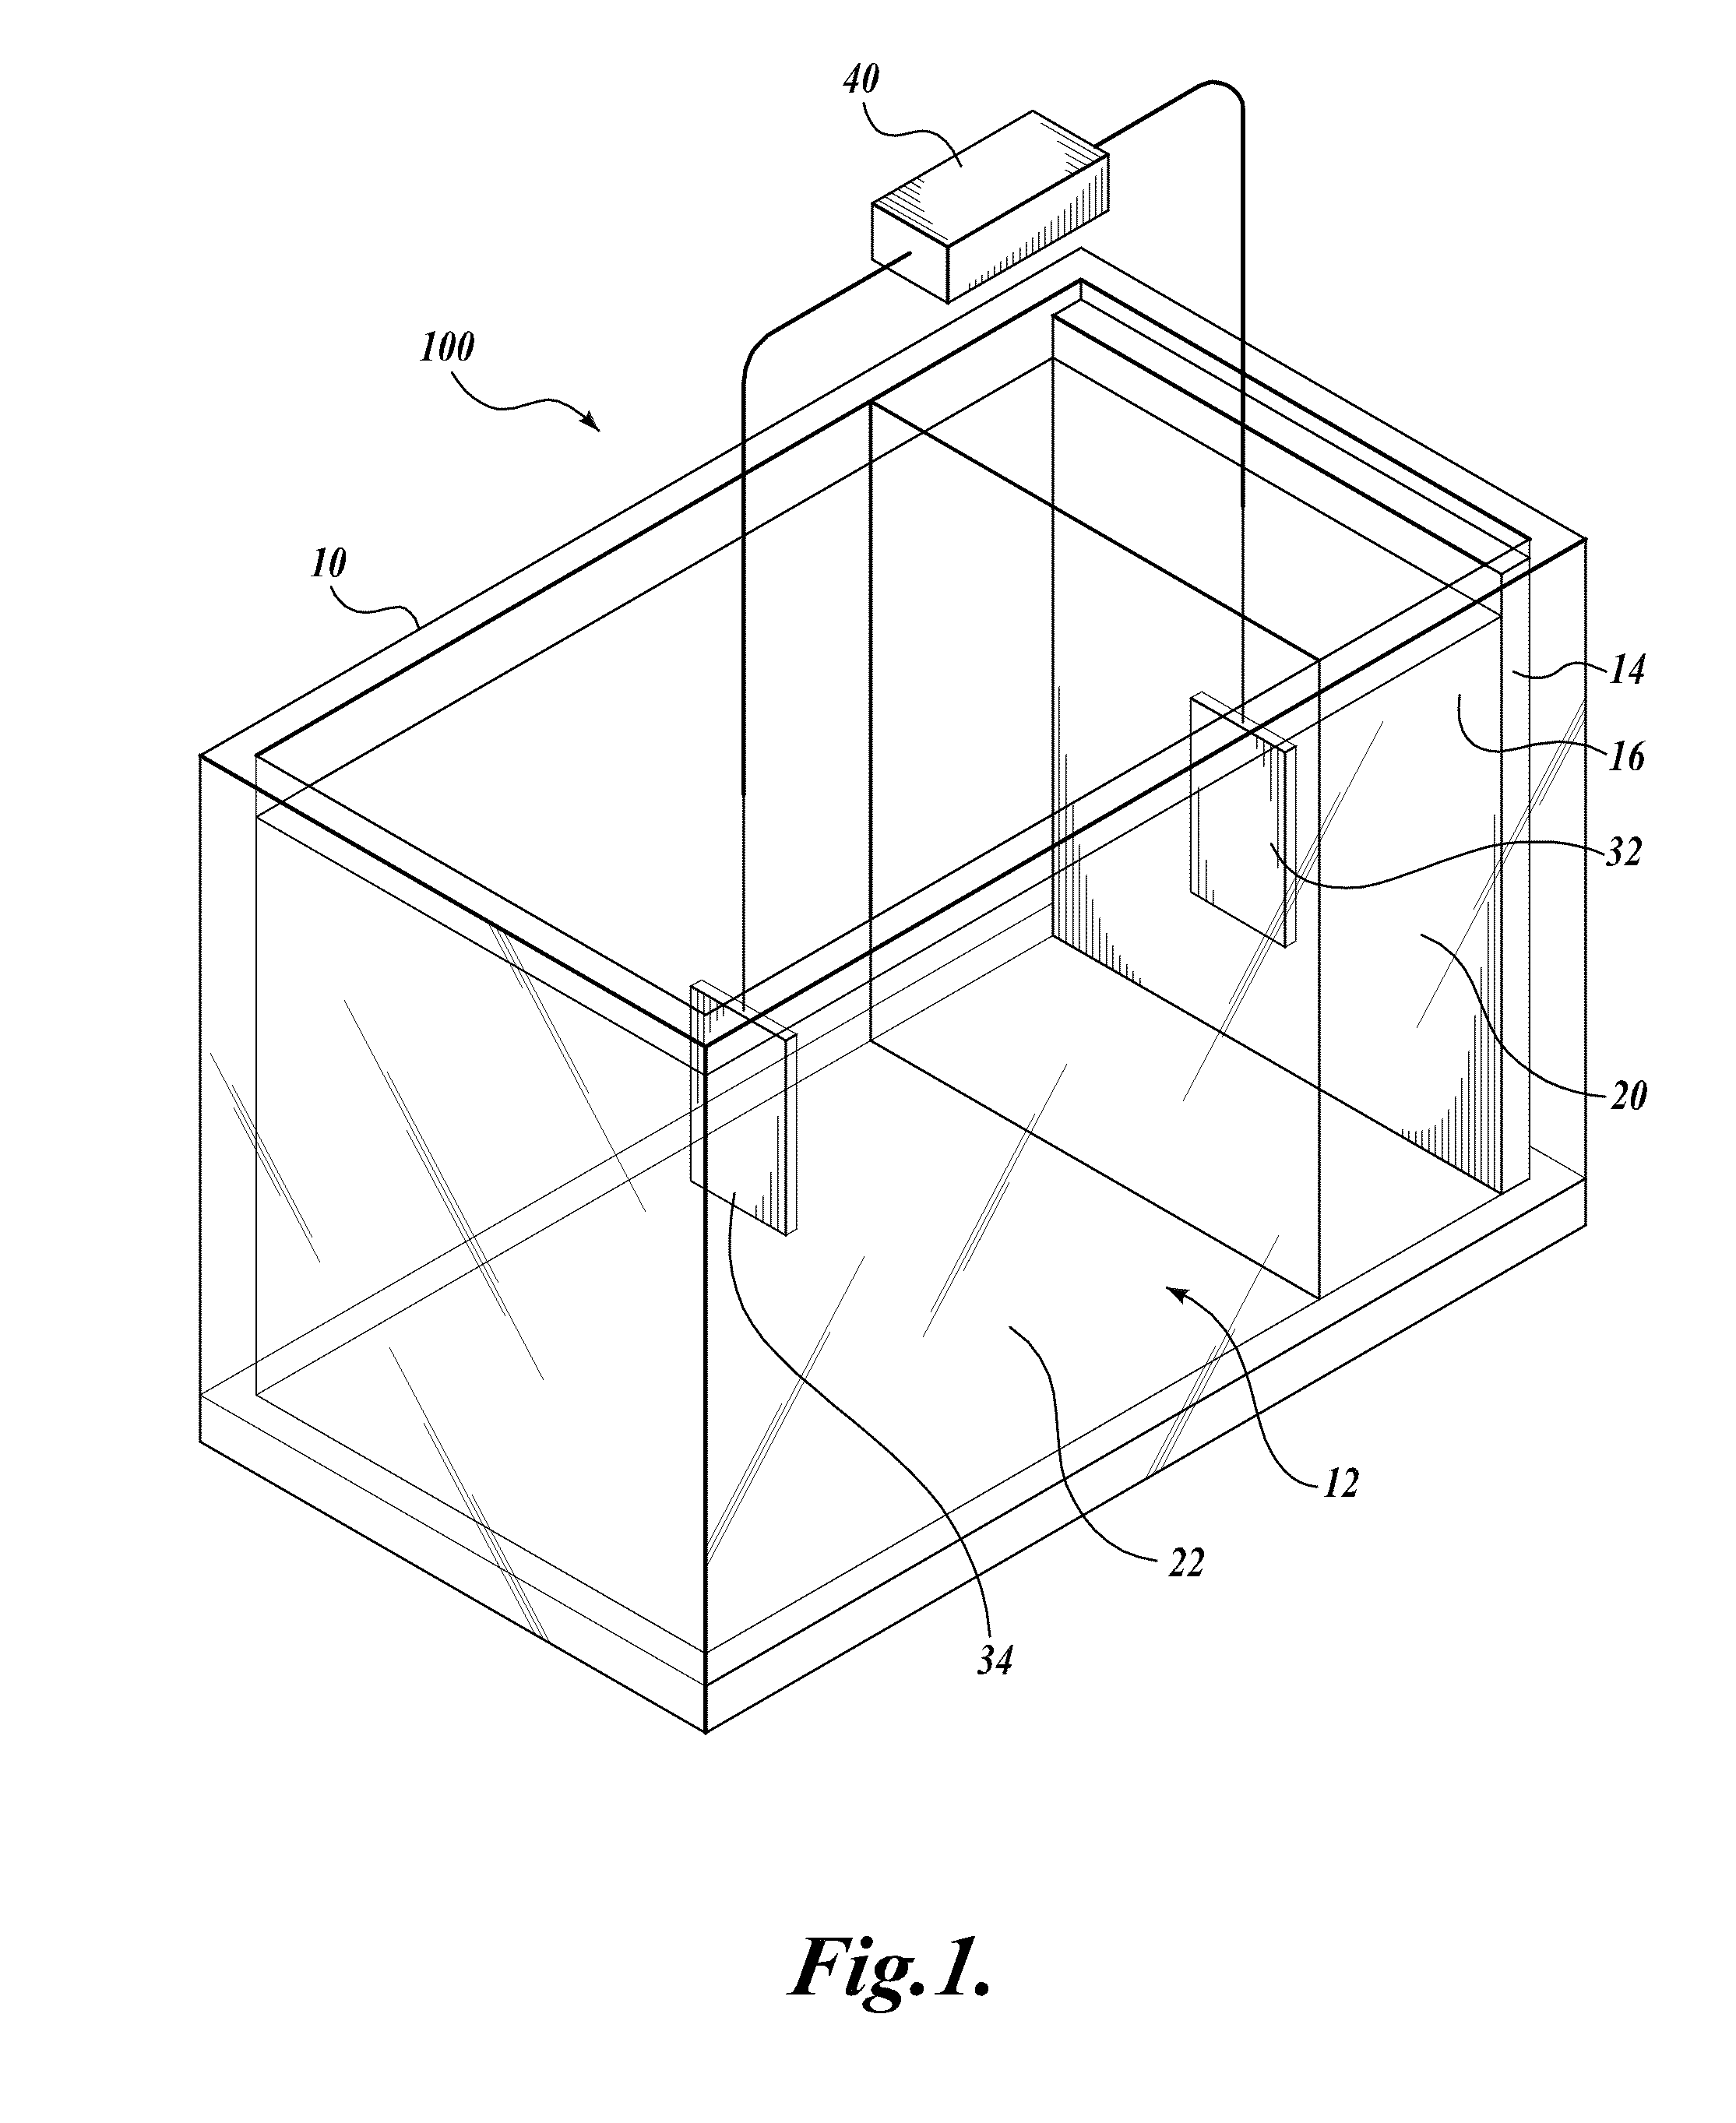 Method and system for generating electrical energy from water